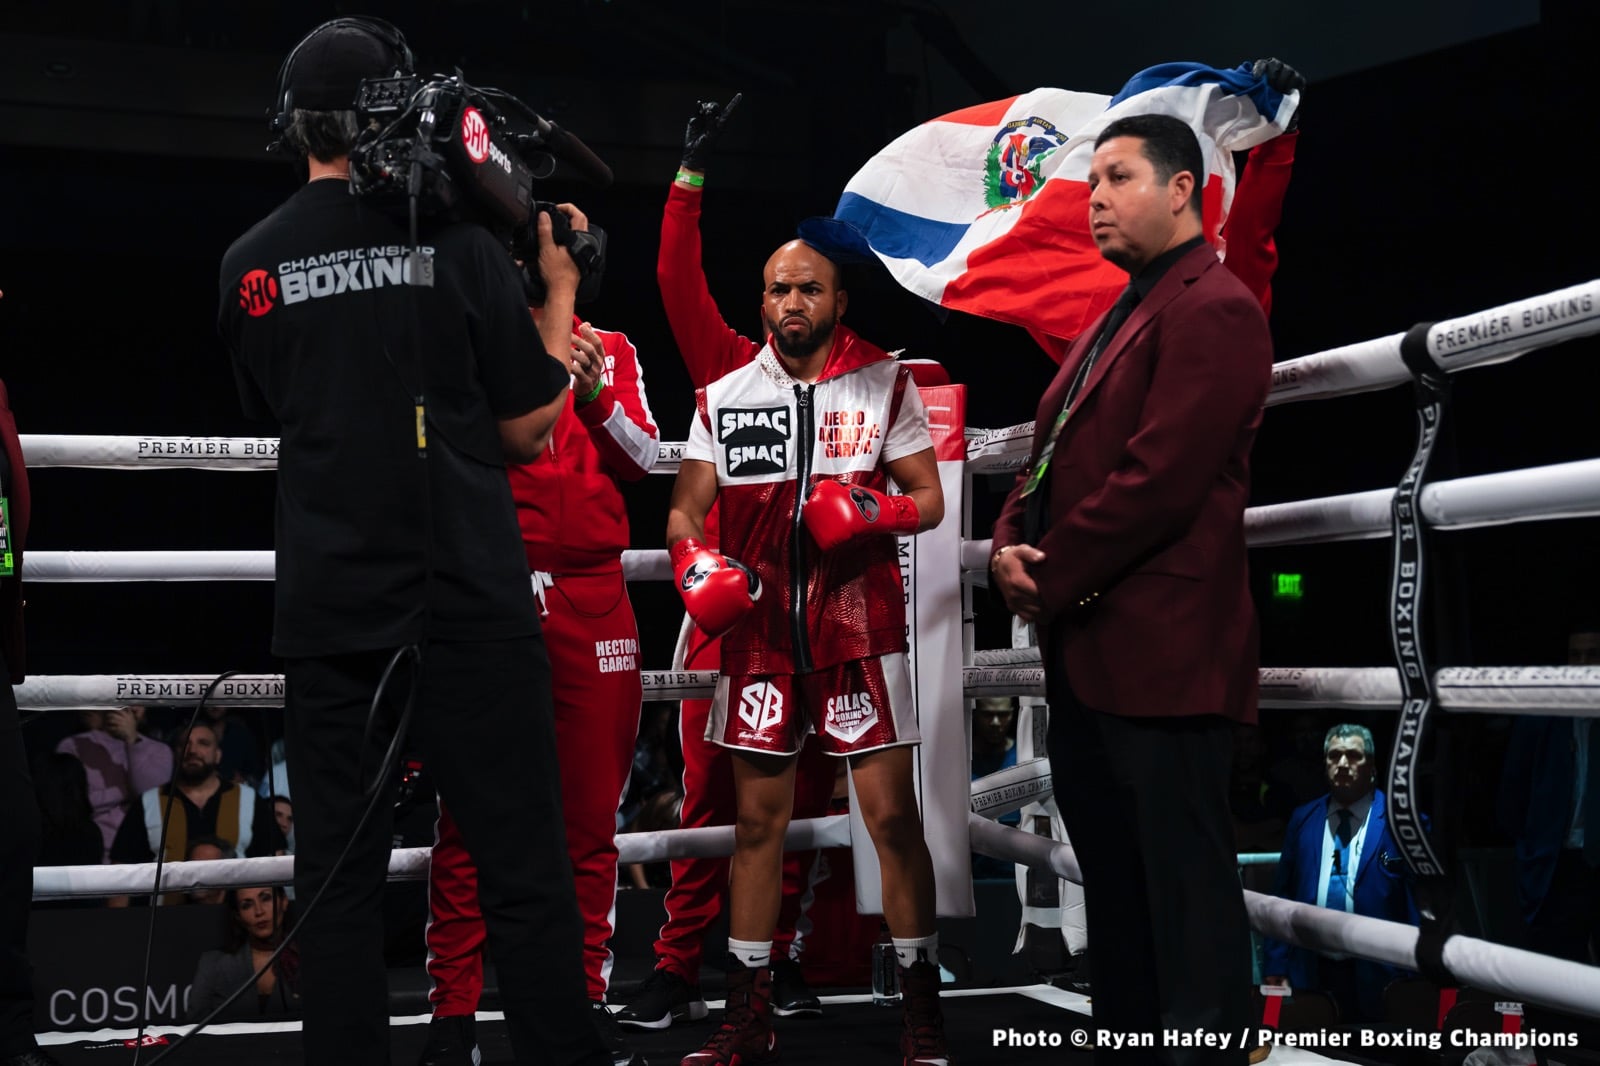 Hector Garcia defeats Colbert; Russell stops Postol - Boxing Results